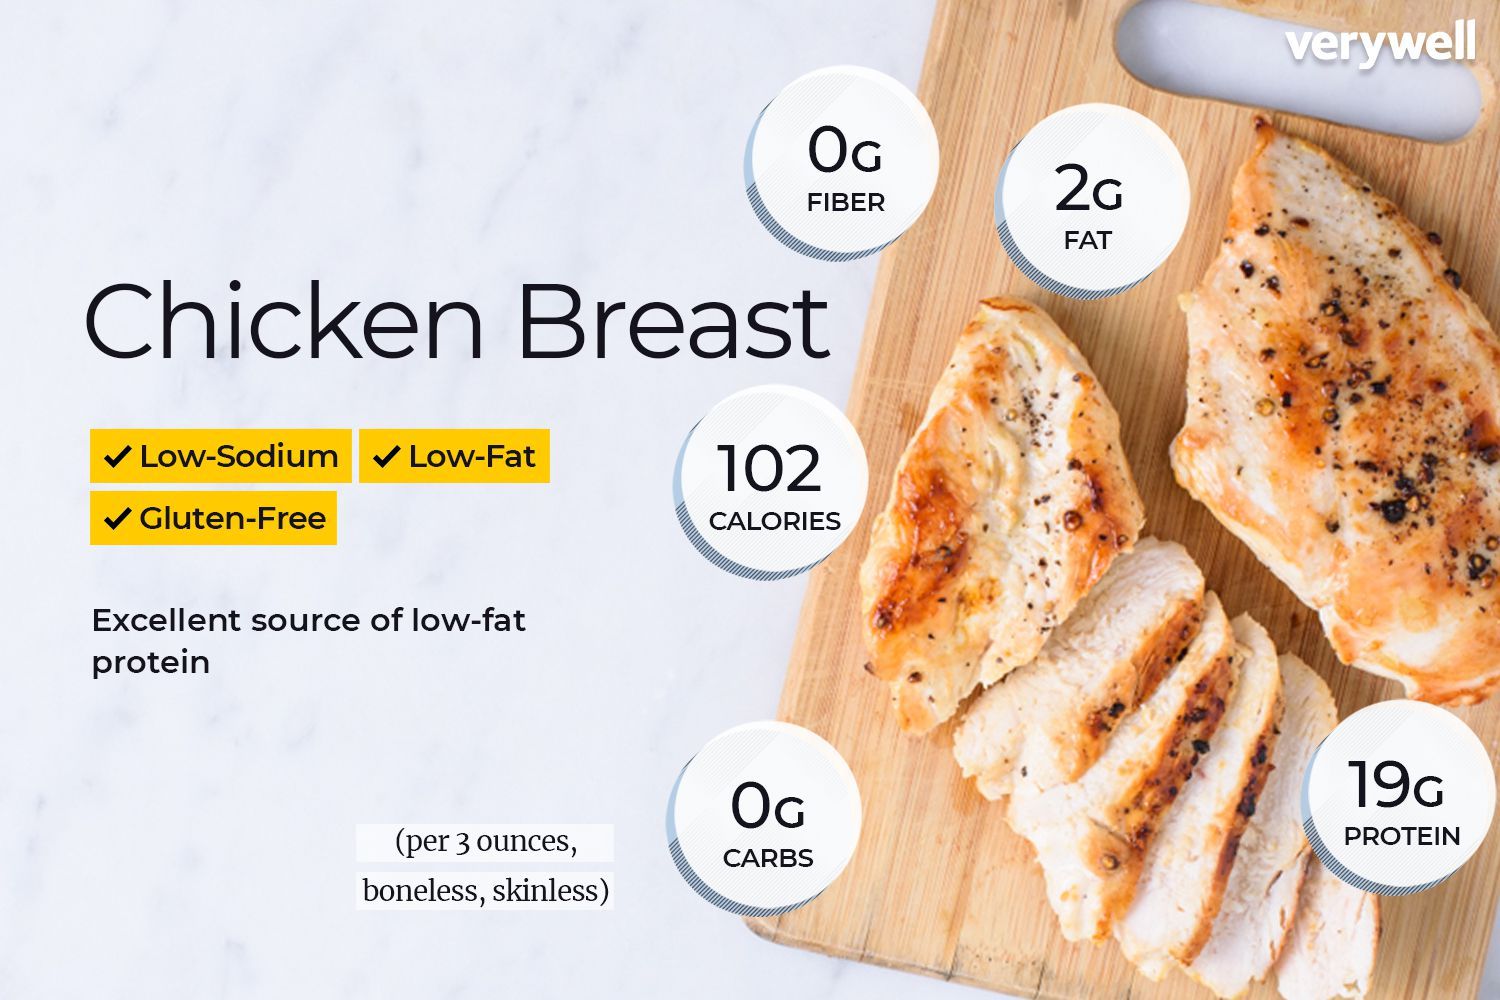 How many calories is 3 oz of rotisserie chicken?